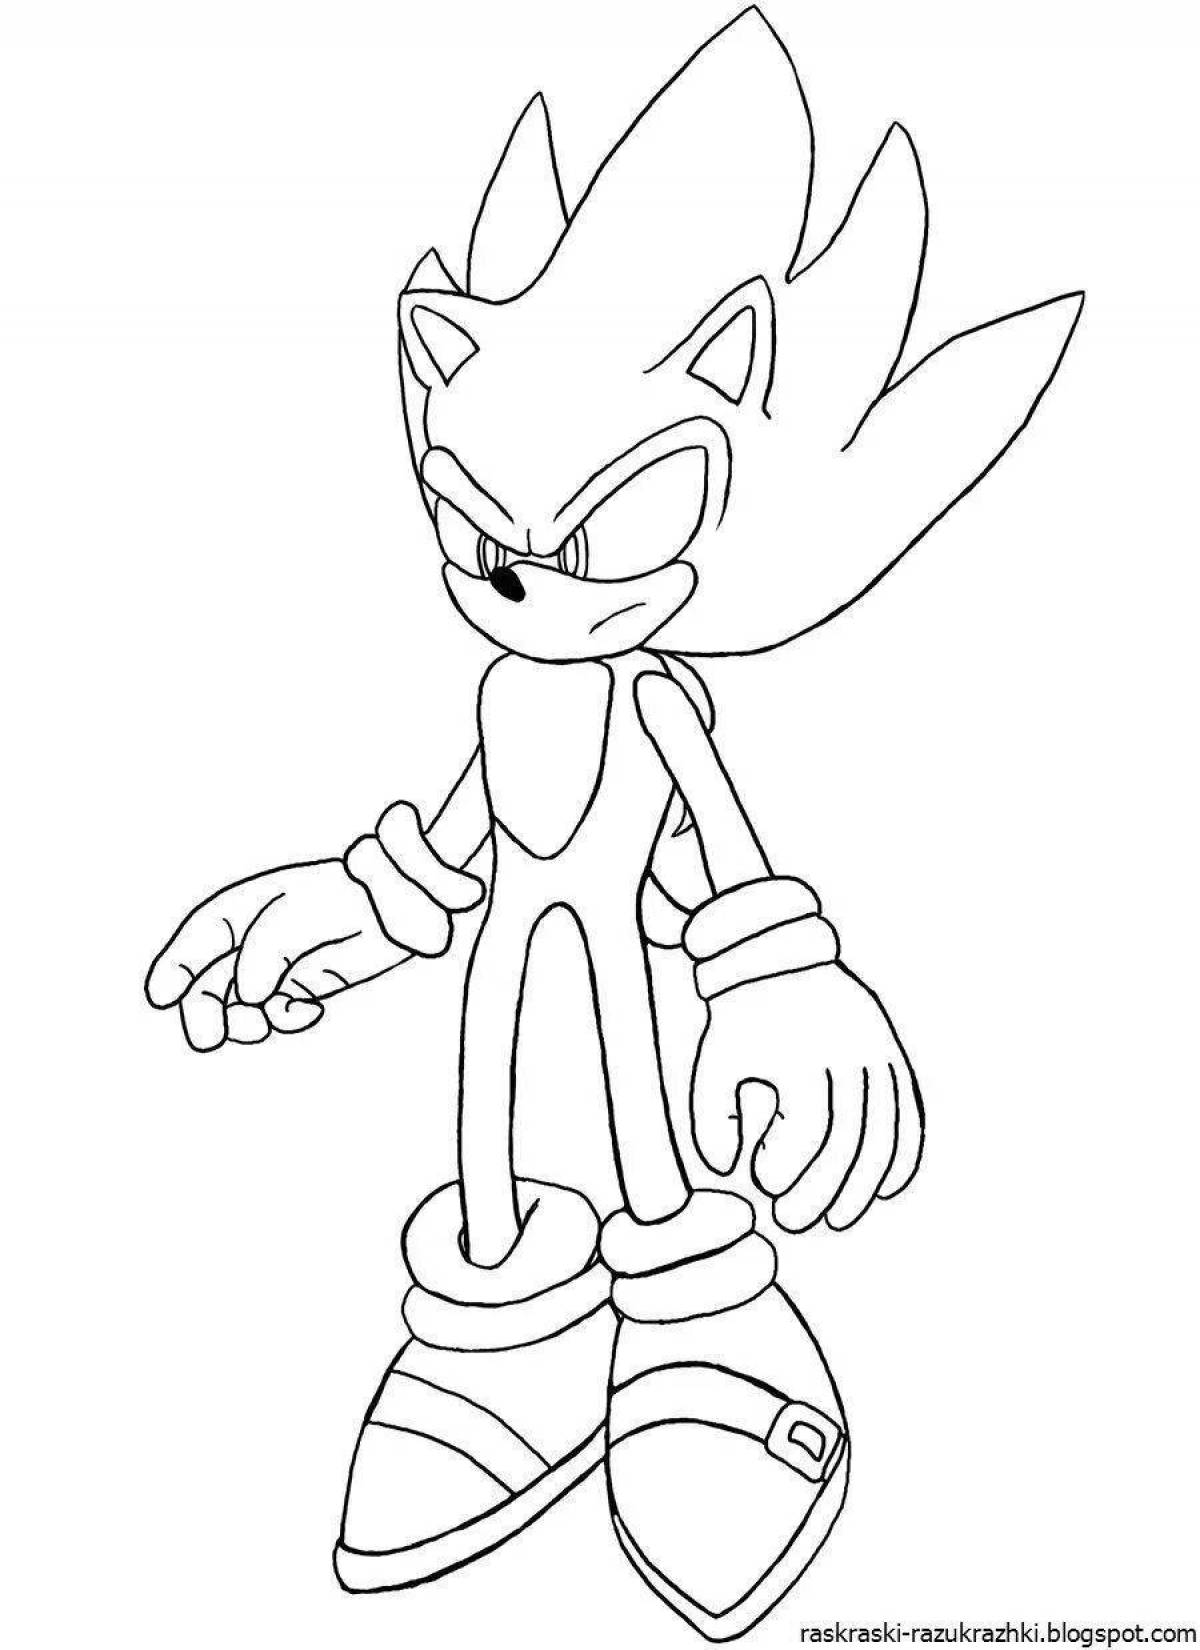 Minecraft sonic freaky coloring